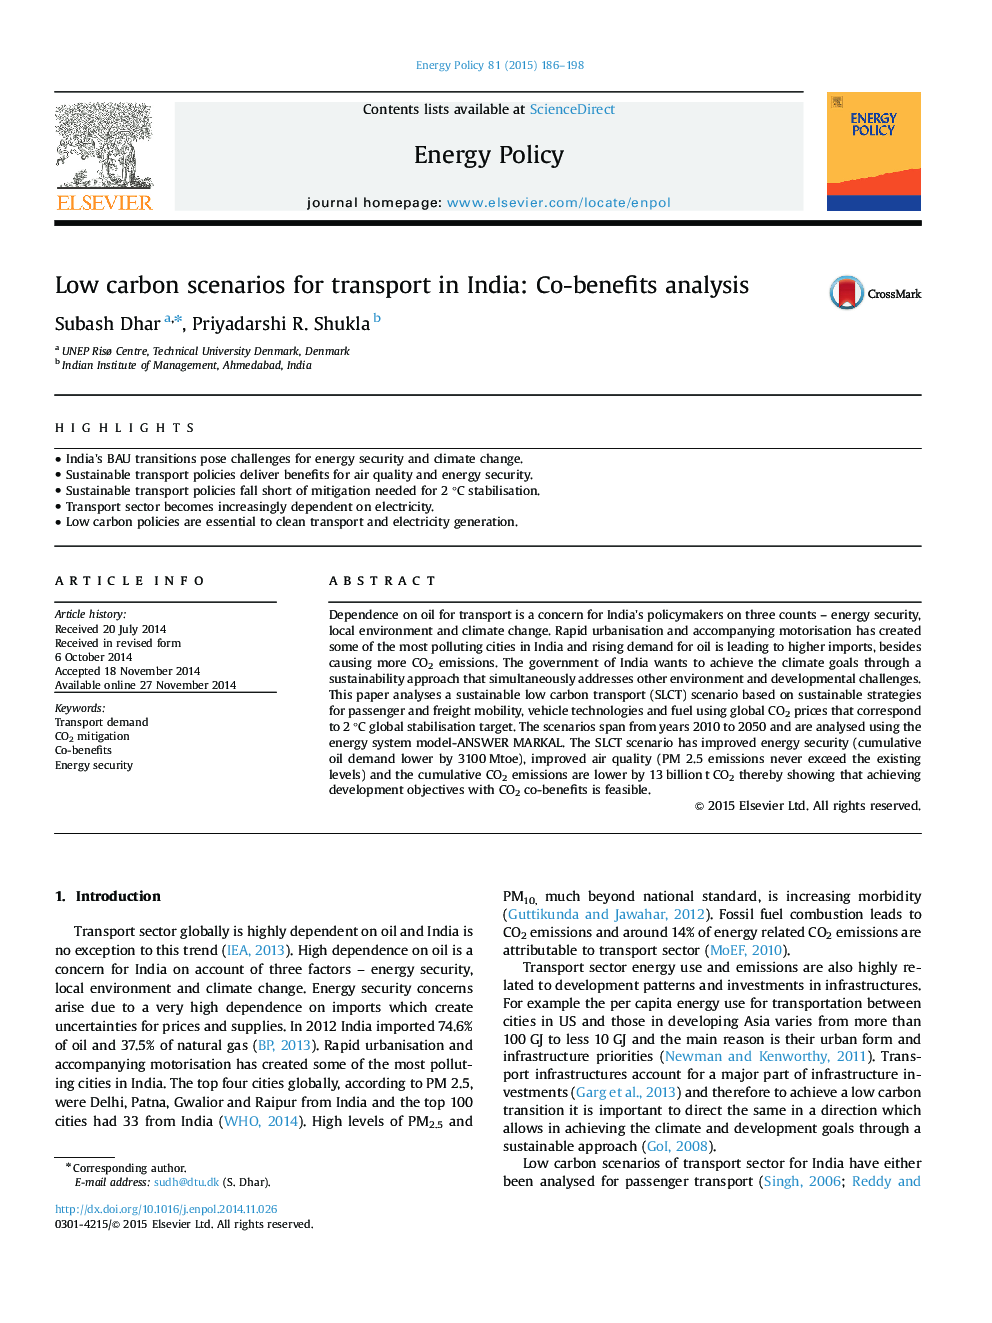 Low carbon scenarios for transport in India: Co-benefits analysis